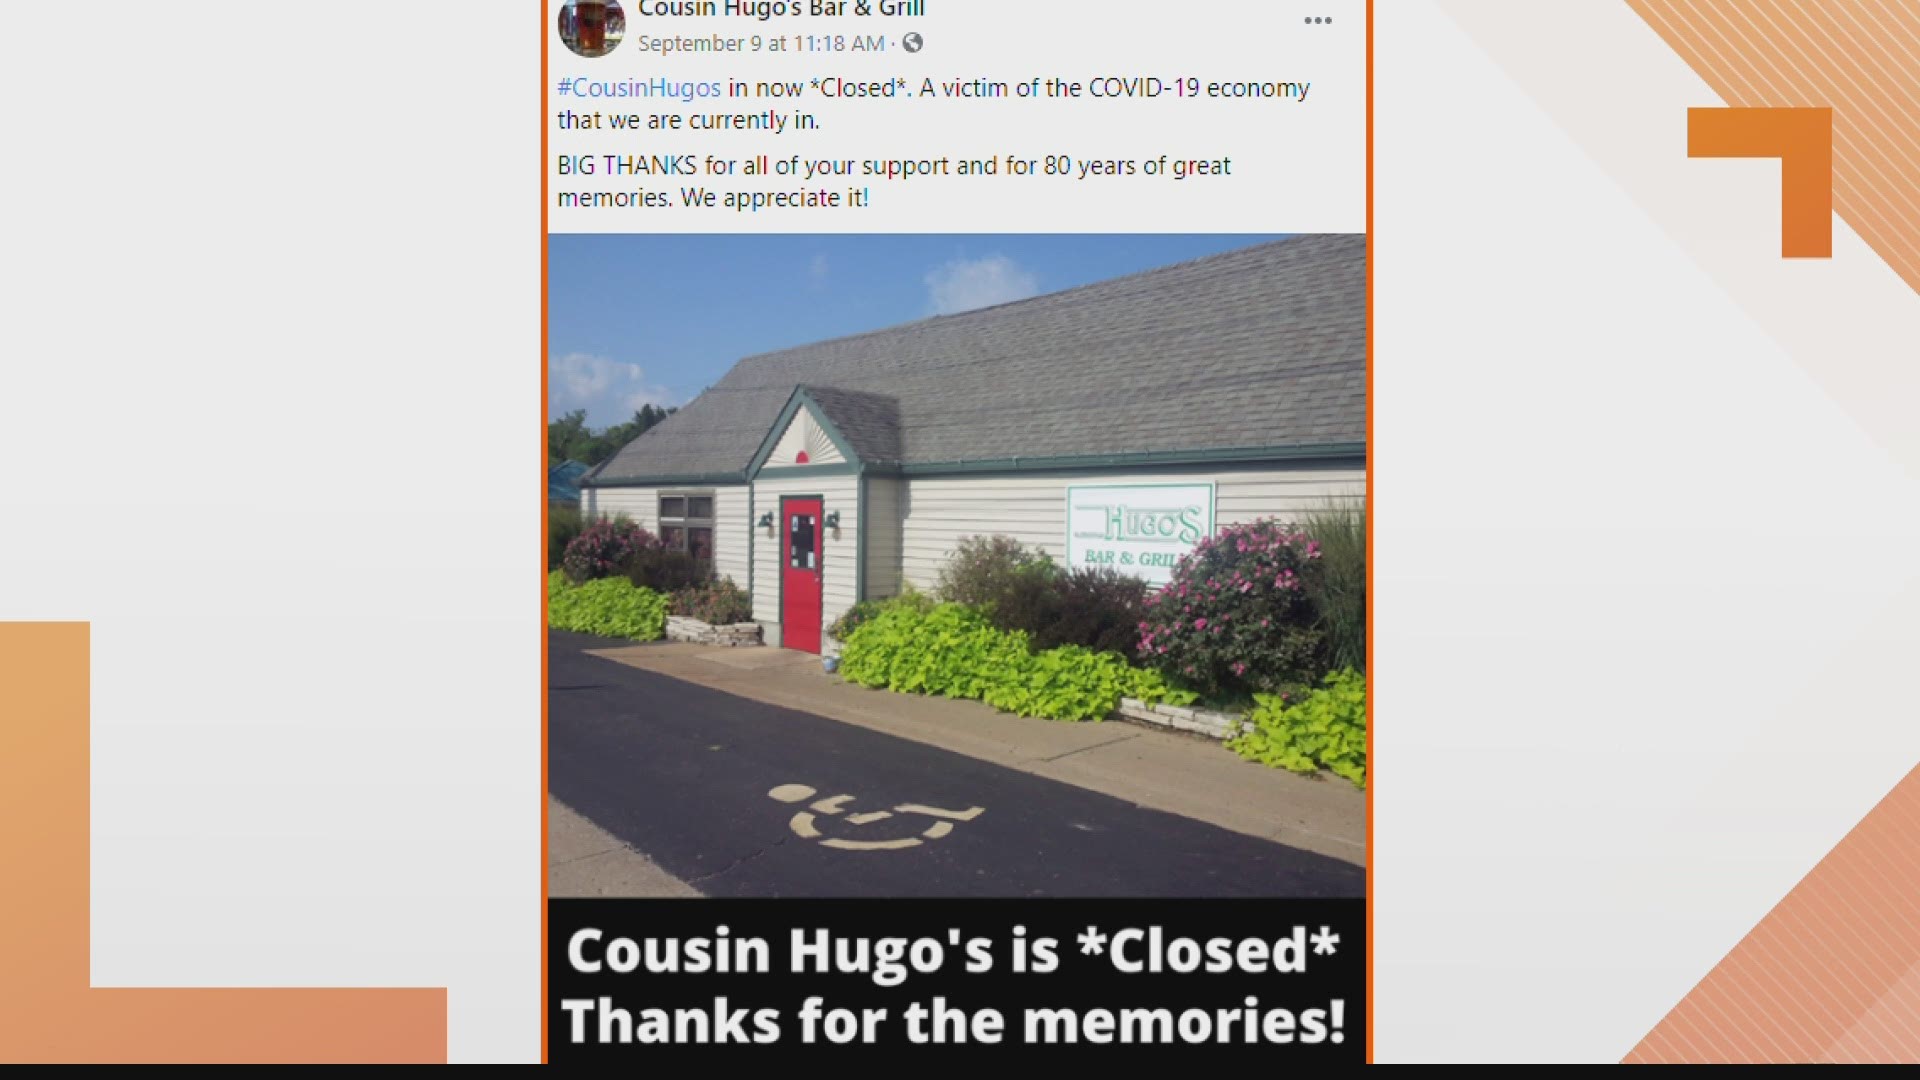 "A victim of the COVID-19 economy that we are currently in," Cousin Hugo's Bar & Grill wrote on Facebook.